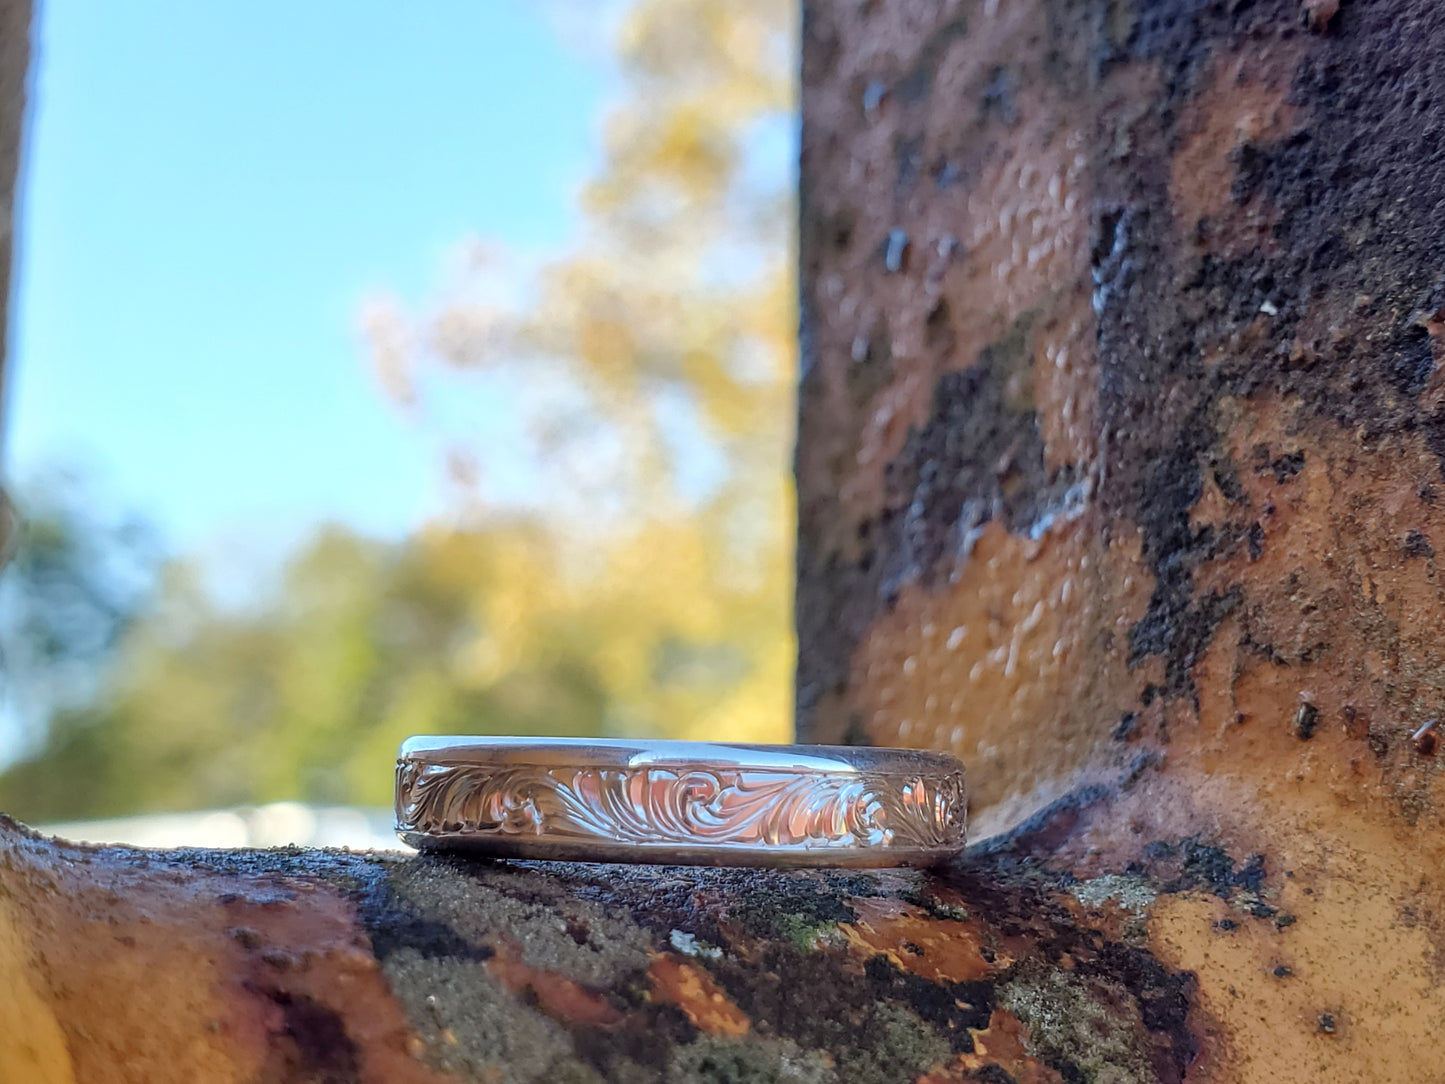 The Madi: Narrow White Gold or Sterling Silver Band, Western Wedding Band, Cowgirl Wedding Ring